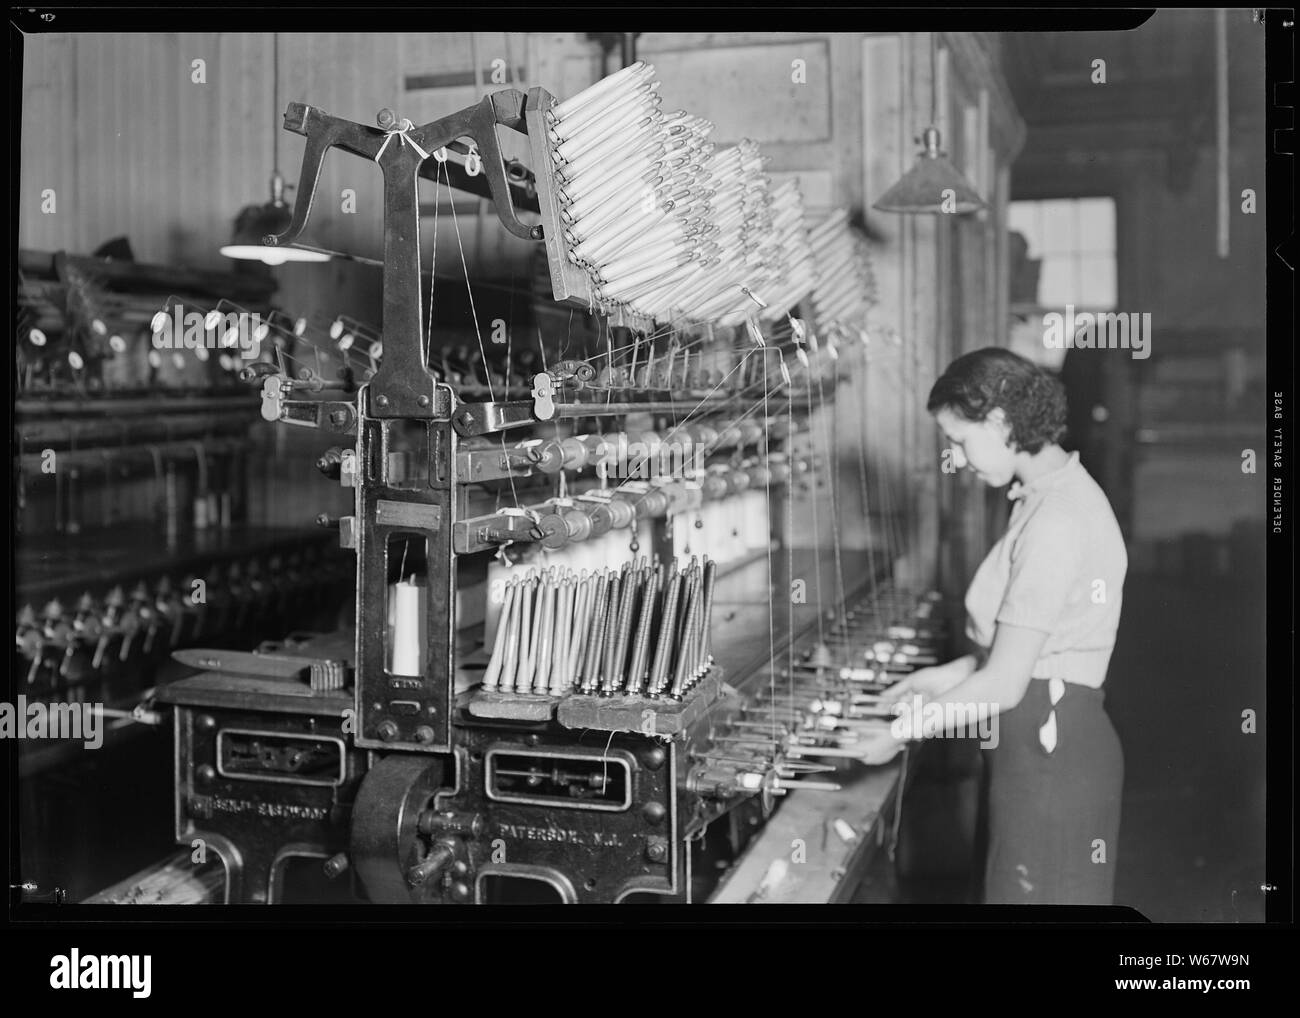 Paterson, New Jersey - Textiles. Quilling. The thread is wound from the cones, seen in an upright position on the table of the machine, on to the quills soon at the position of the operator's hands. Here the rack of partially filled quills hanging on the top of the machine and the racks of empty quills on the table of the machine. Stock Photo